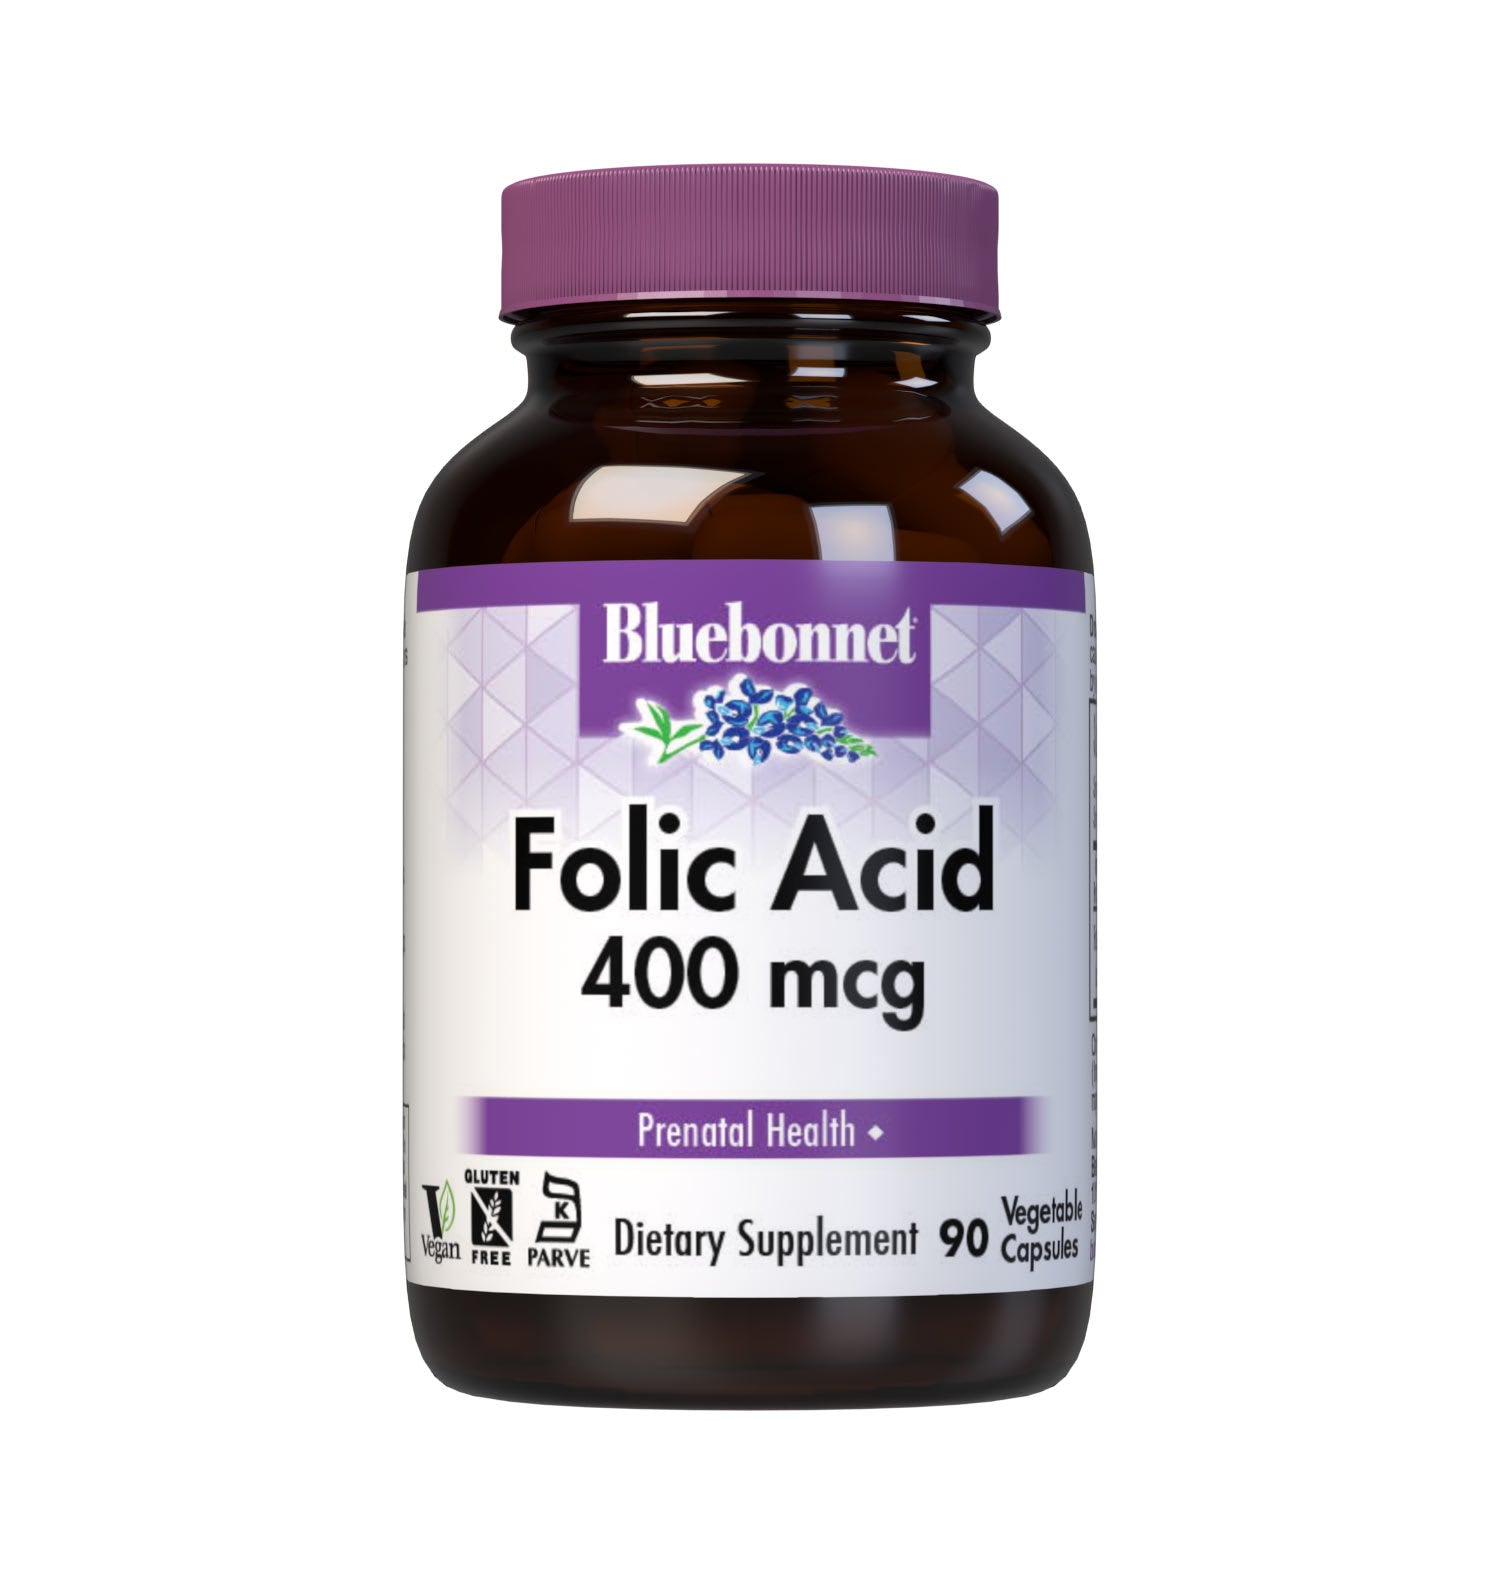 Bluebonnet’s Folic Acid 400 mcg Vegetable Capsules are formulated with folate in its crystalline form which may help support neural tube development. #size_90 count